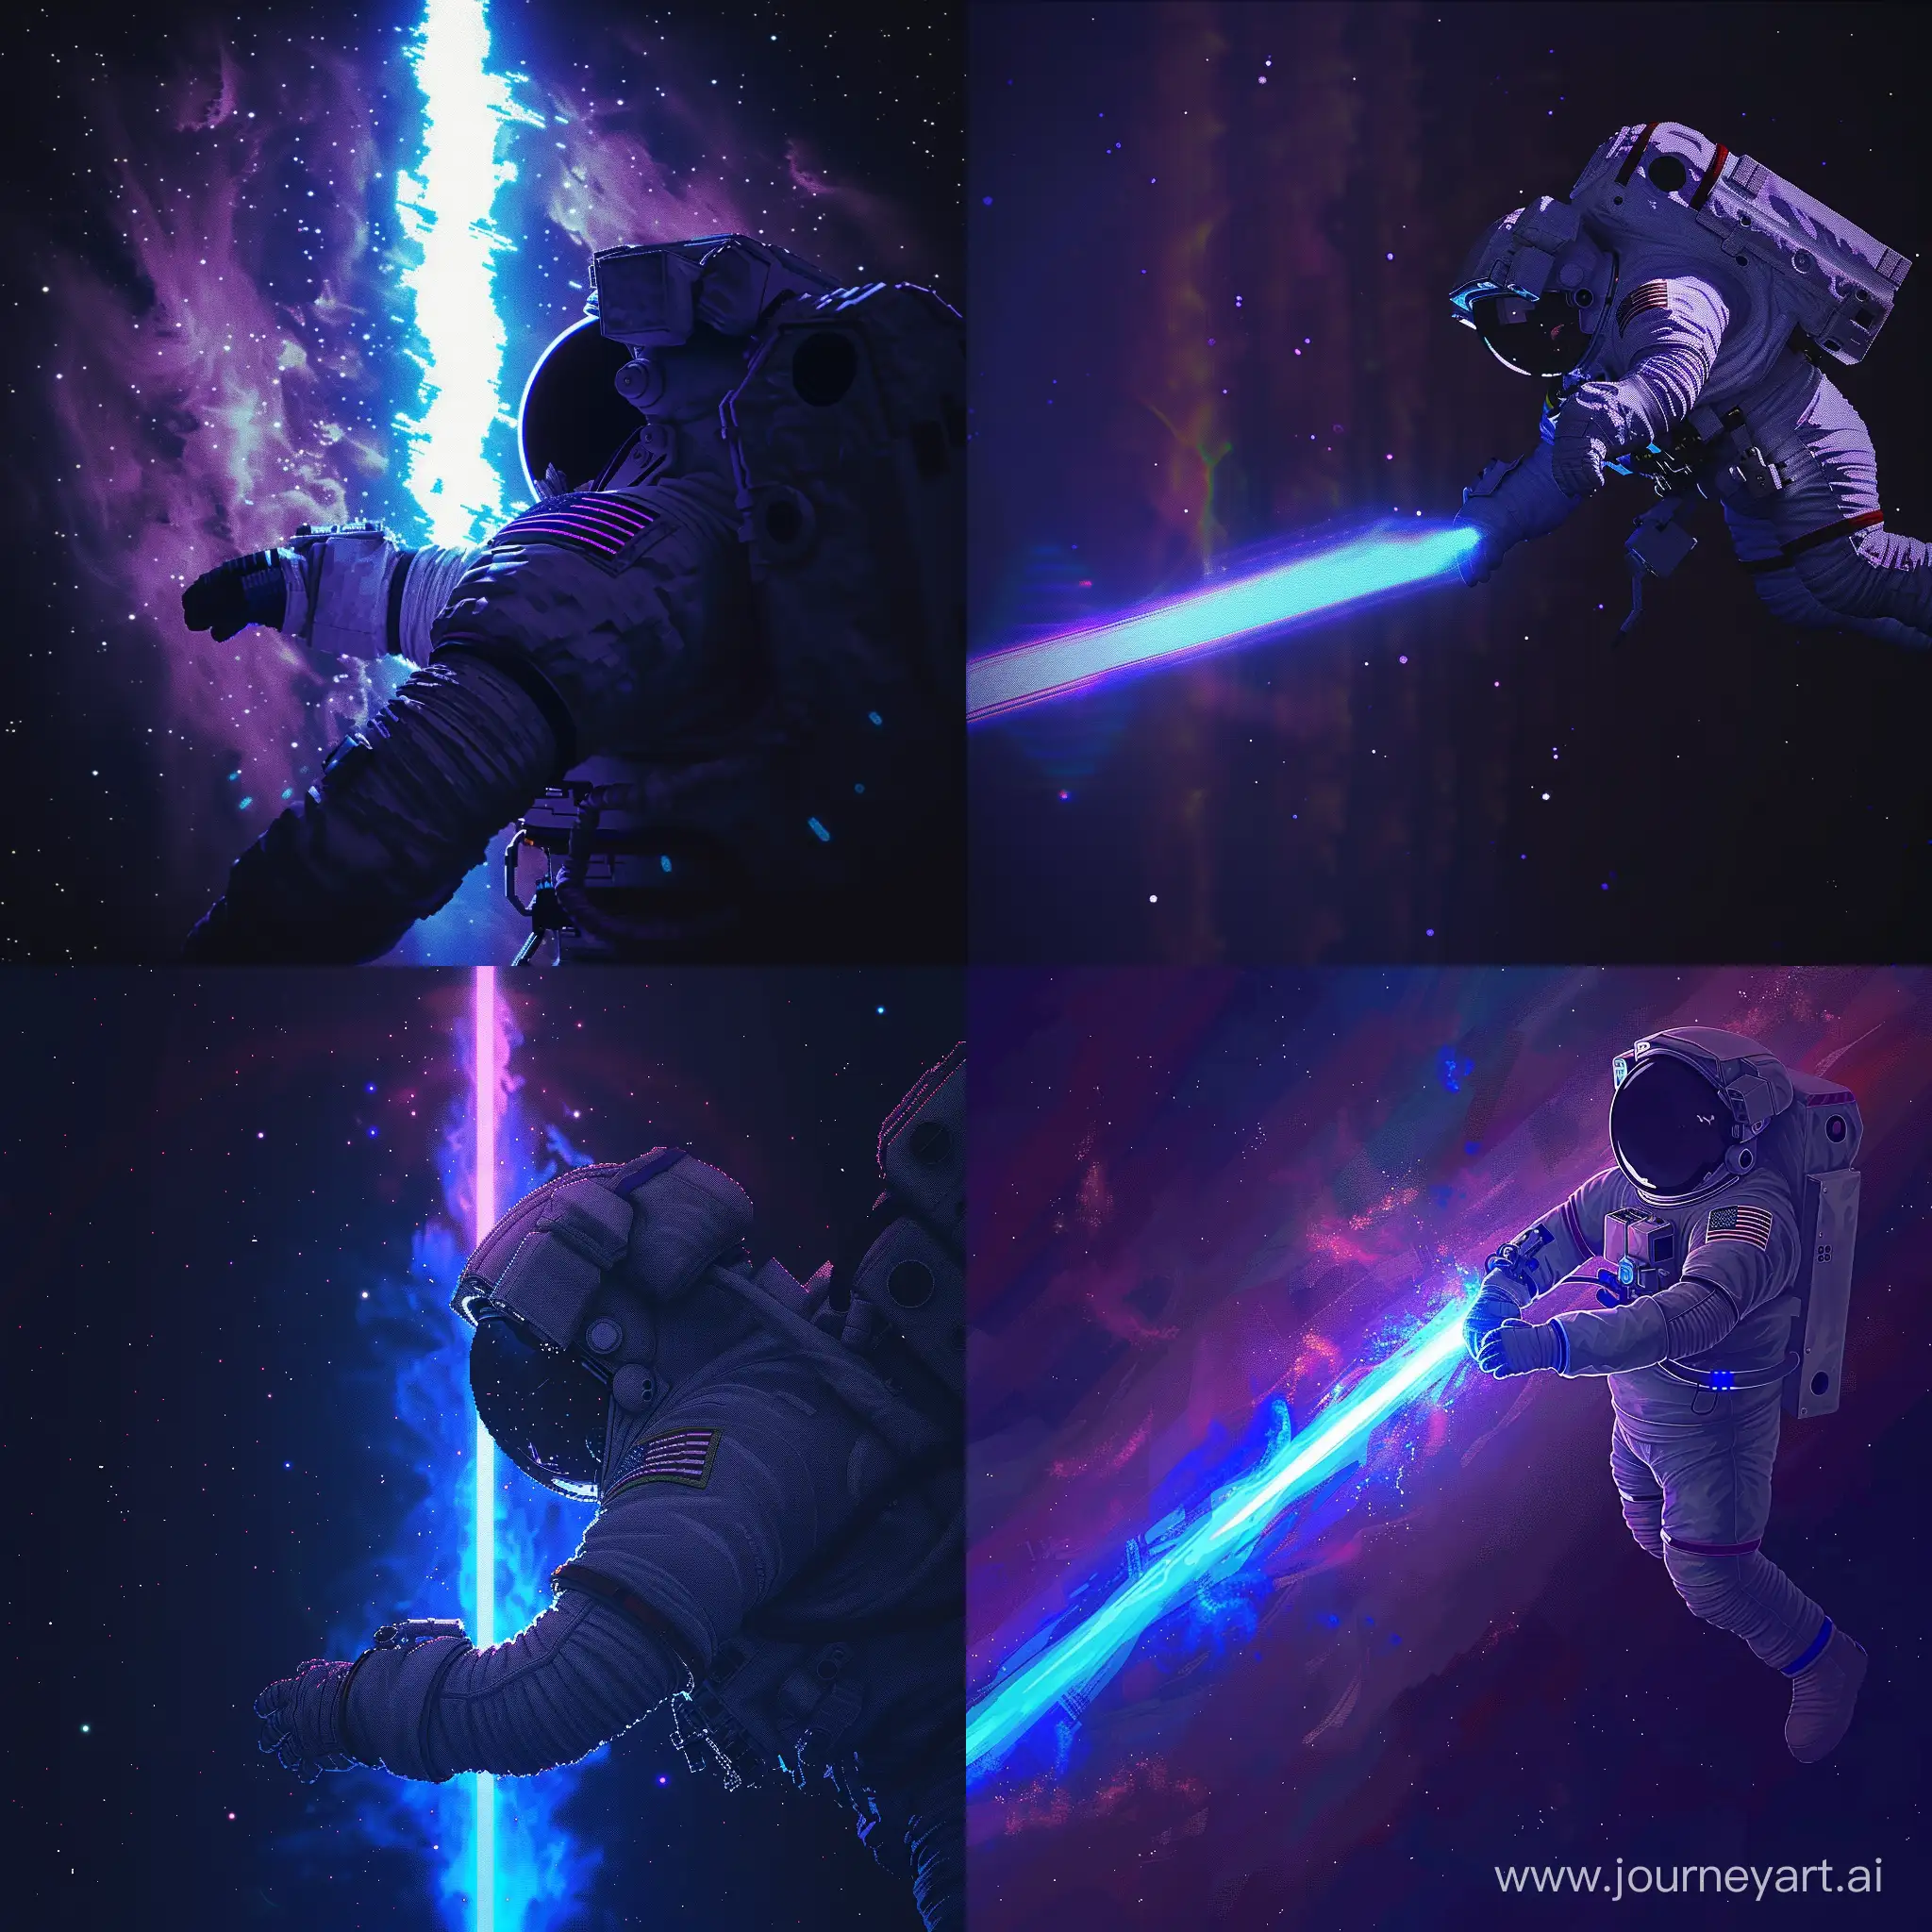 An Astronaut is in a Dark Space[Astronaut Position Top Right], A Blue & Purple Light Shines Through the Middle of the Photo, Pixel Art, Minimalism --v 6.0 --s 100